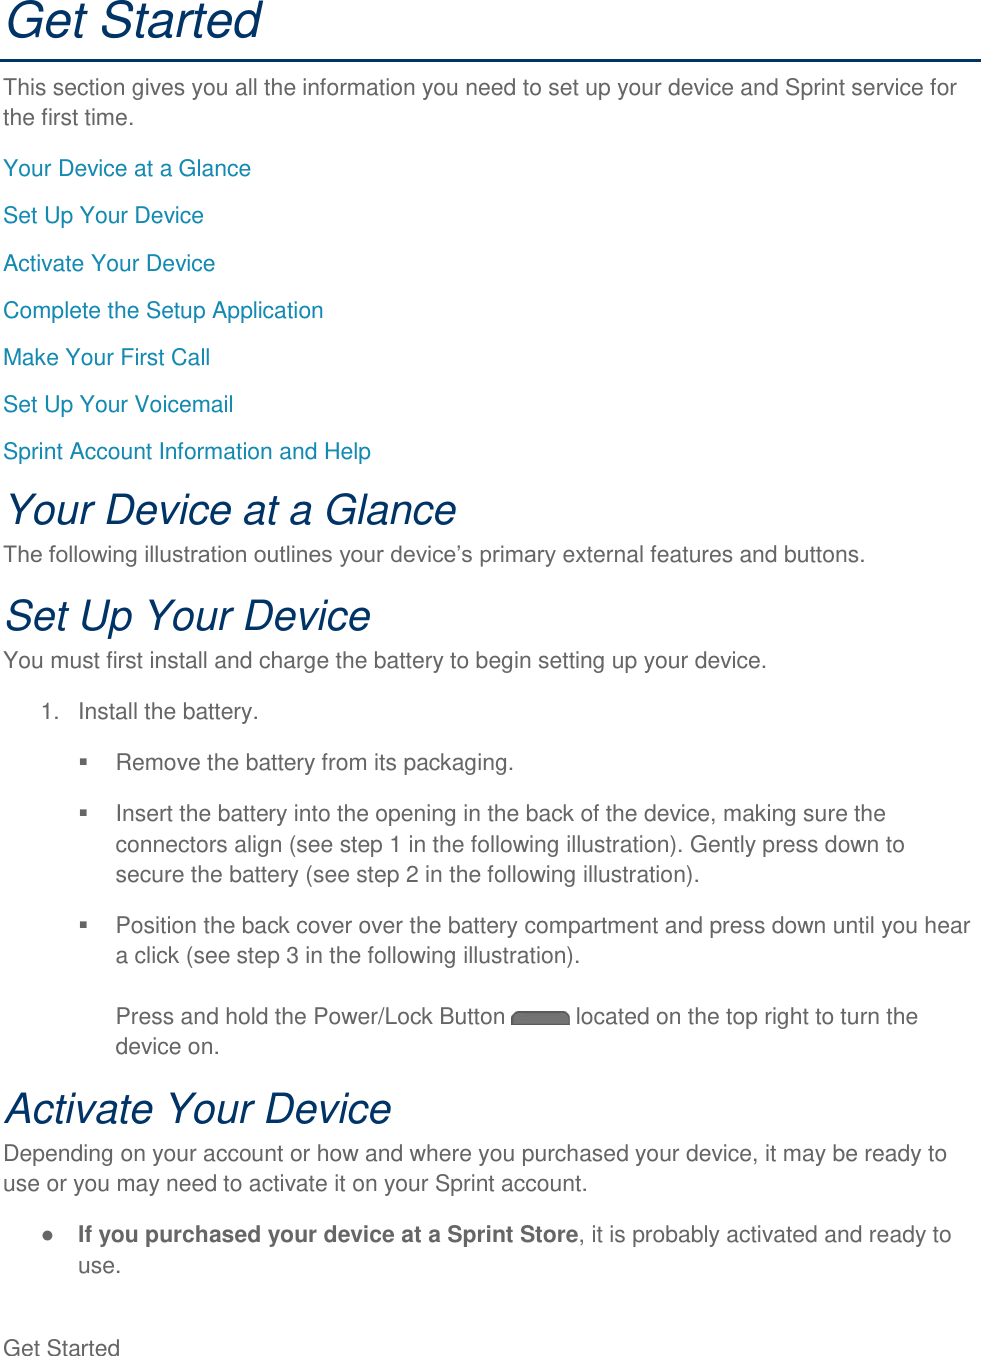 Get Started   Get Started This section gives you all the information you need to set up your device and Sprint service for the first time. Your Device at a Glance Set Up Your Device Activate Your Device Complete the Setup Application Make Your First Call Set Up Your Voicemail Sprint Account Information and Help Your Device at a Glance external features and buttons. Set Up Your Device You must first install and charge the battery to begin setting up your device. 1.  Install the battery.   Remove the battery from its packaging.   Insert the battery into the opening in the back of the device, making sure the connectors align (see step 1 in the following illustration). Gently press down to secure the battery (see step 2 in the following illustration).   Position the back cover over the battery compartment and press down until you hear a click (see step 3 in the following illustration).  Press and hold the Power/Lock Button   located on the top right to turn the device on. Activate Your Device Depending on your account or how and where you purchased your device, it may be ready to use or you may need to activate it on your Sprint account.  If you purchased your device at a Sprint Store, it is probably activated and ready to use. 